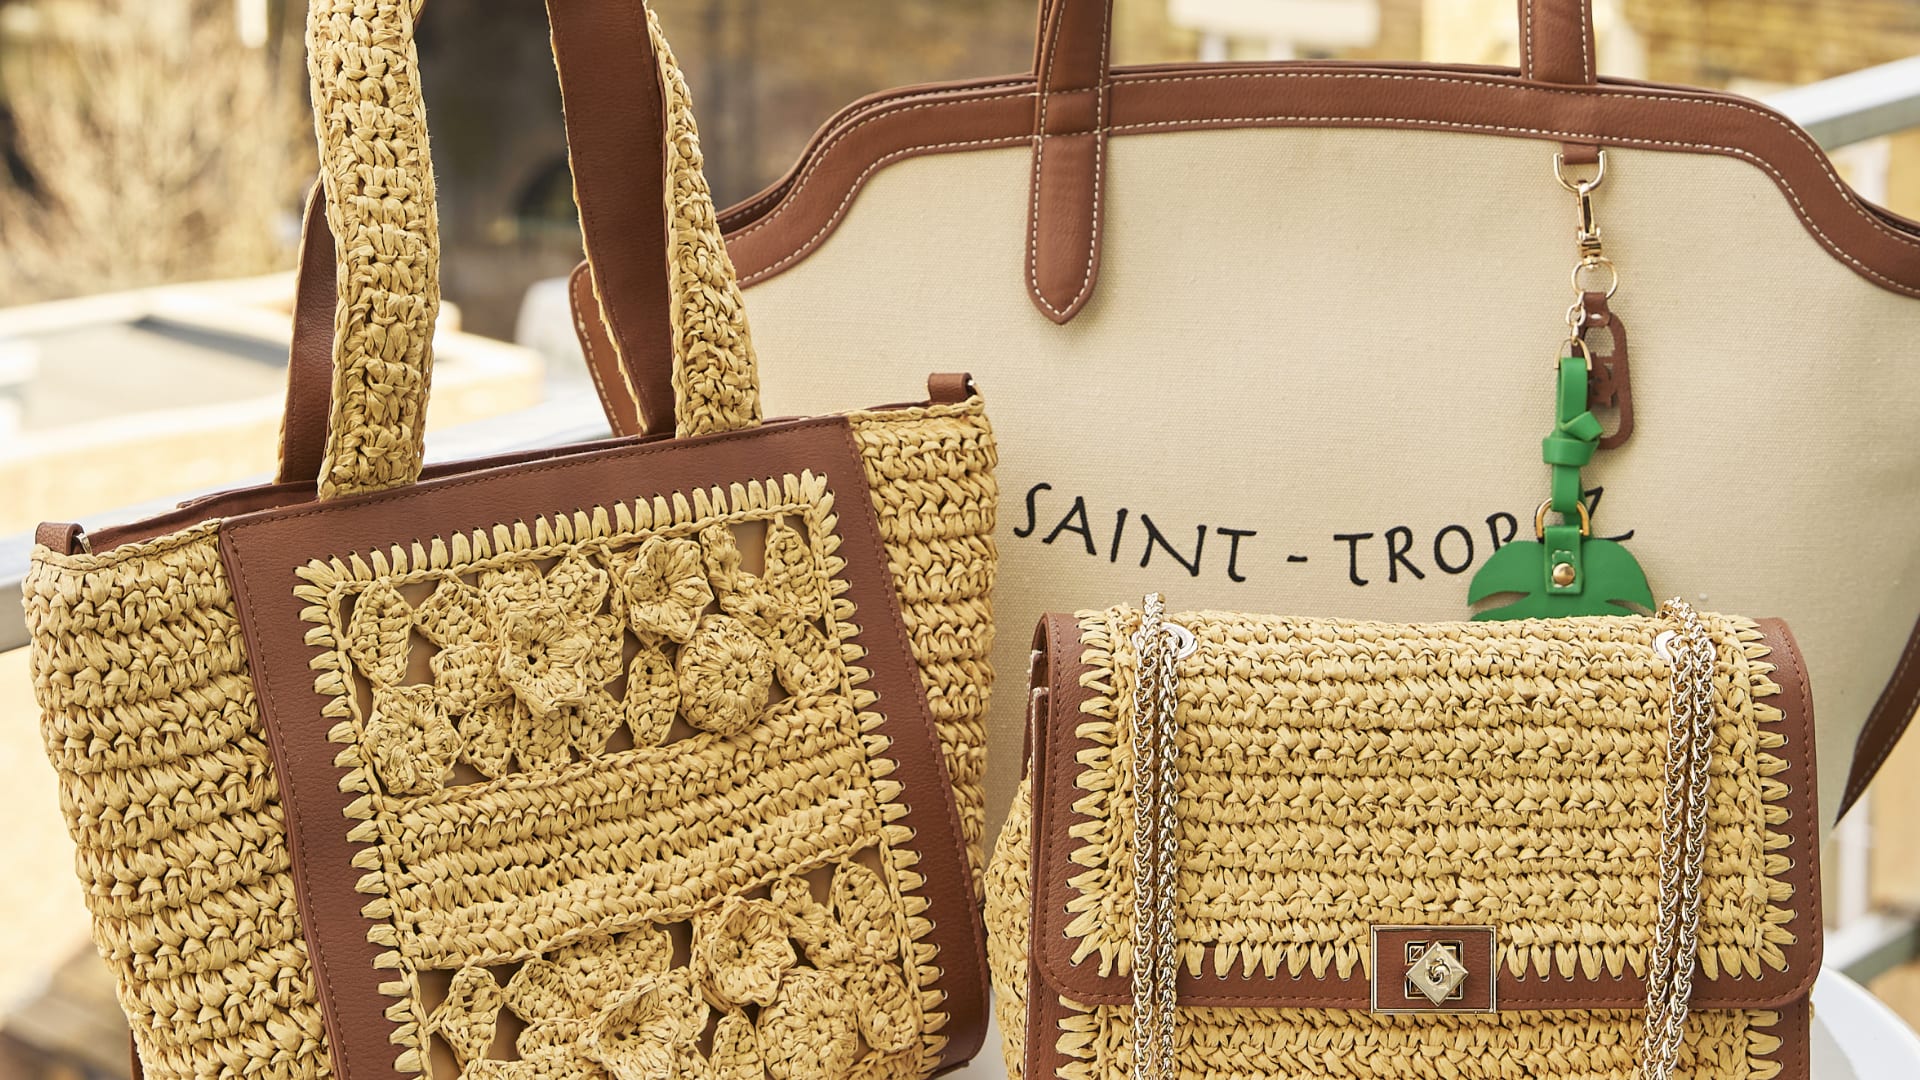 Natural raffia bags with different features, woven detail, chain strap and a slogan.